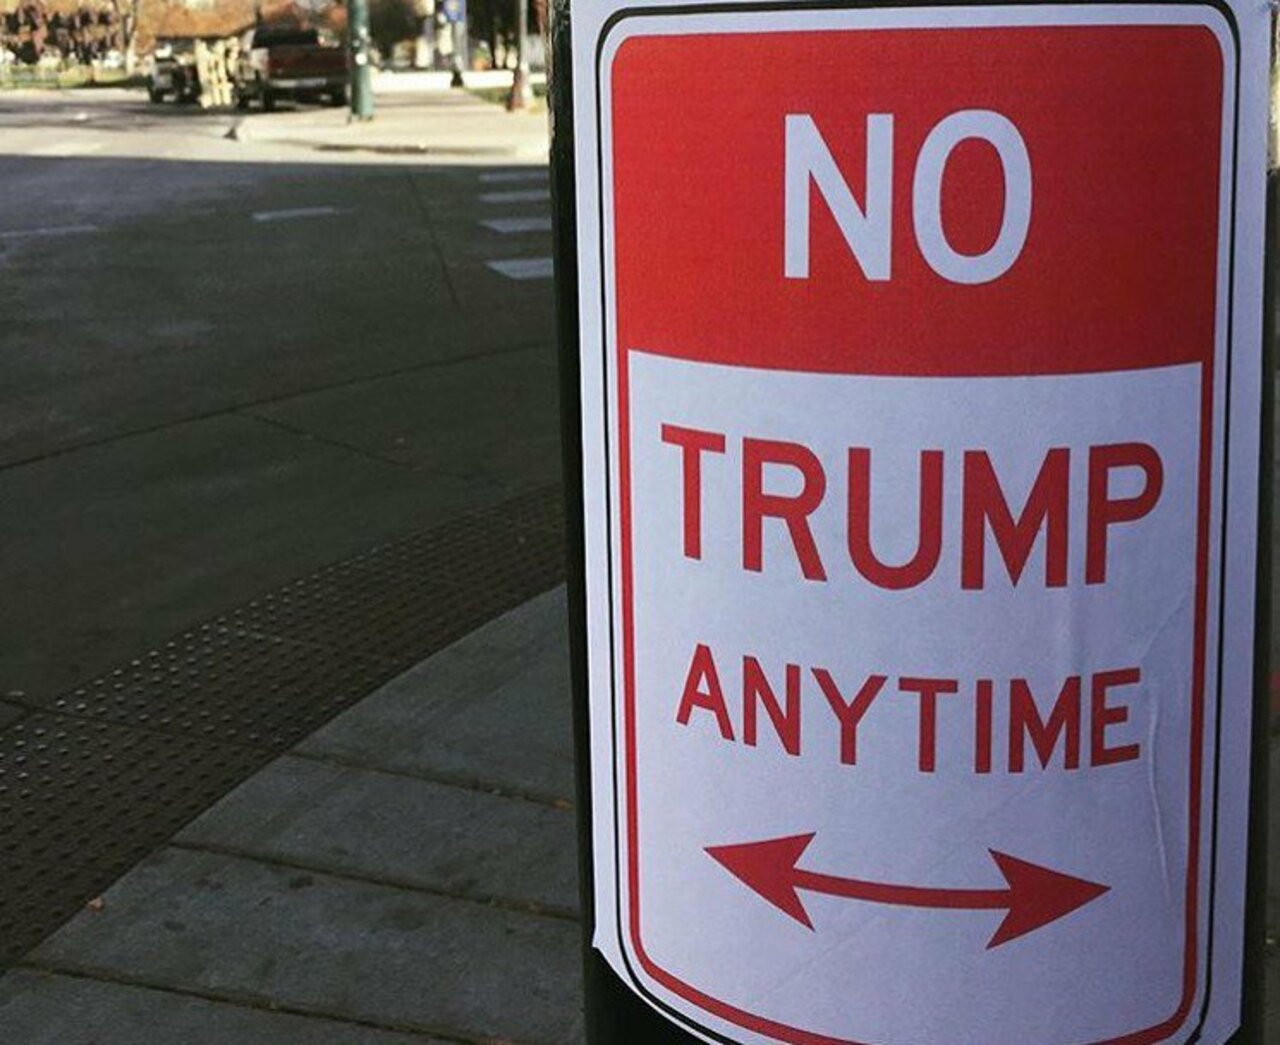 "No Trump Anytime" #streetart pops up in the Mile High City, courtesy @plasticjesusart. http://westword.com/arts/no-trump-anytime-street-art-pops-up-in-denver-8511918 https://t.co/gy4aMF04Sc